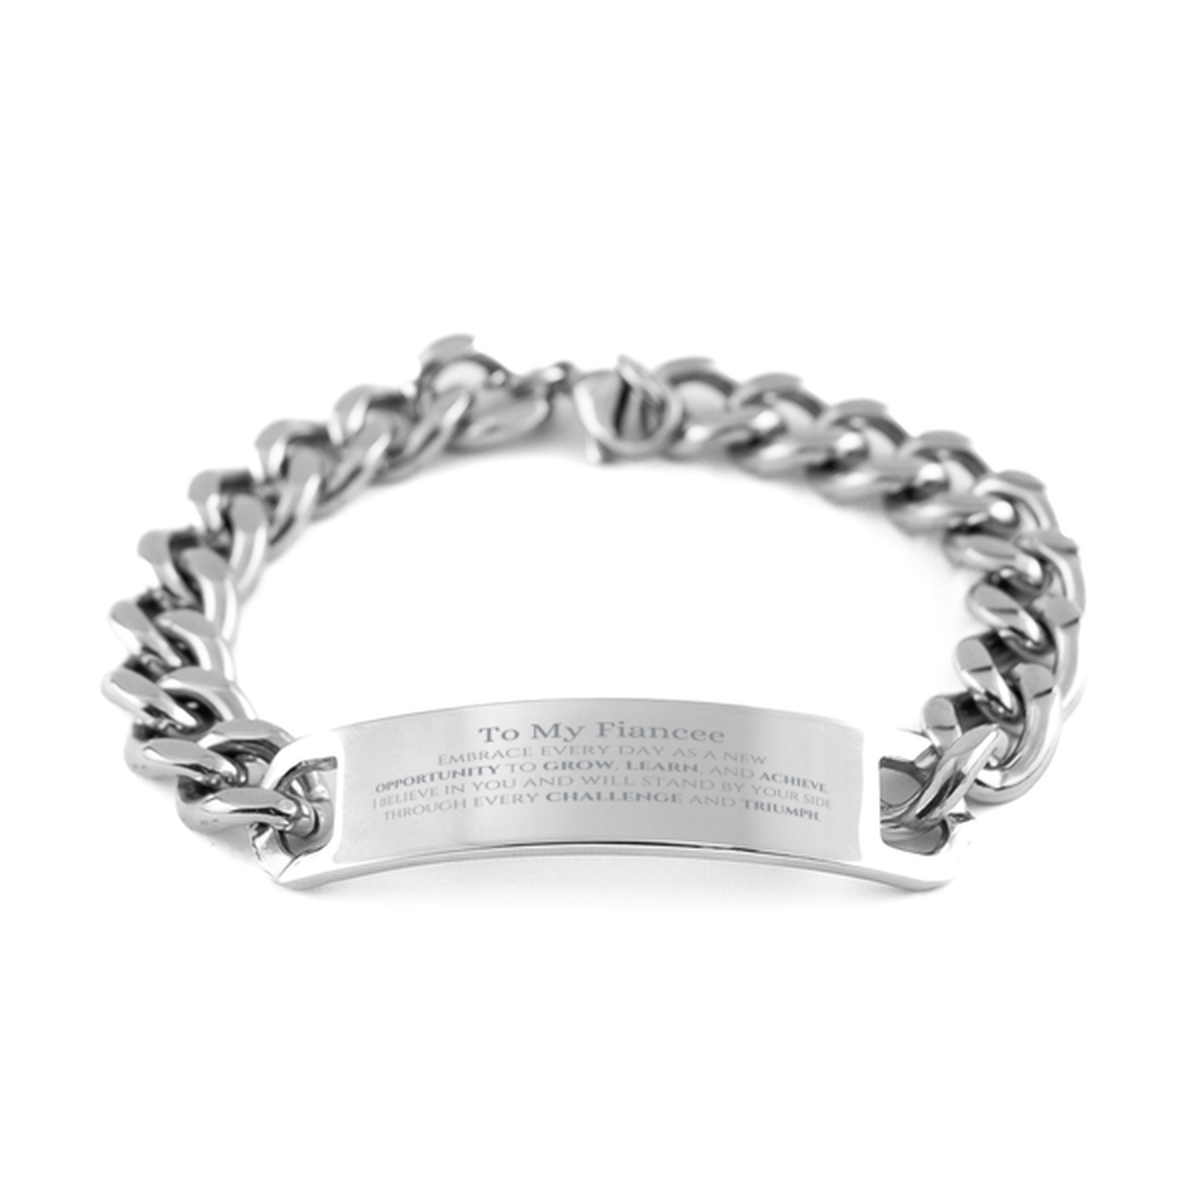 To My Fiancee Gifts, I believe in you and will stand by your side, Inspirational Cuban Chain Stainless Steel Bracelet For Fiancee, Birthday Christmas Motivational Fiancee Gifts